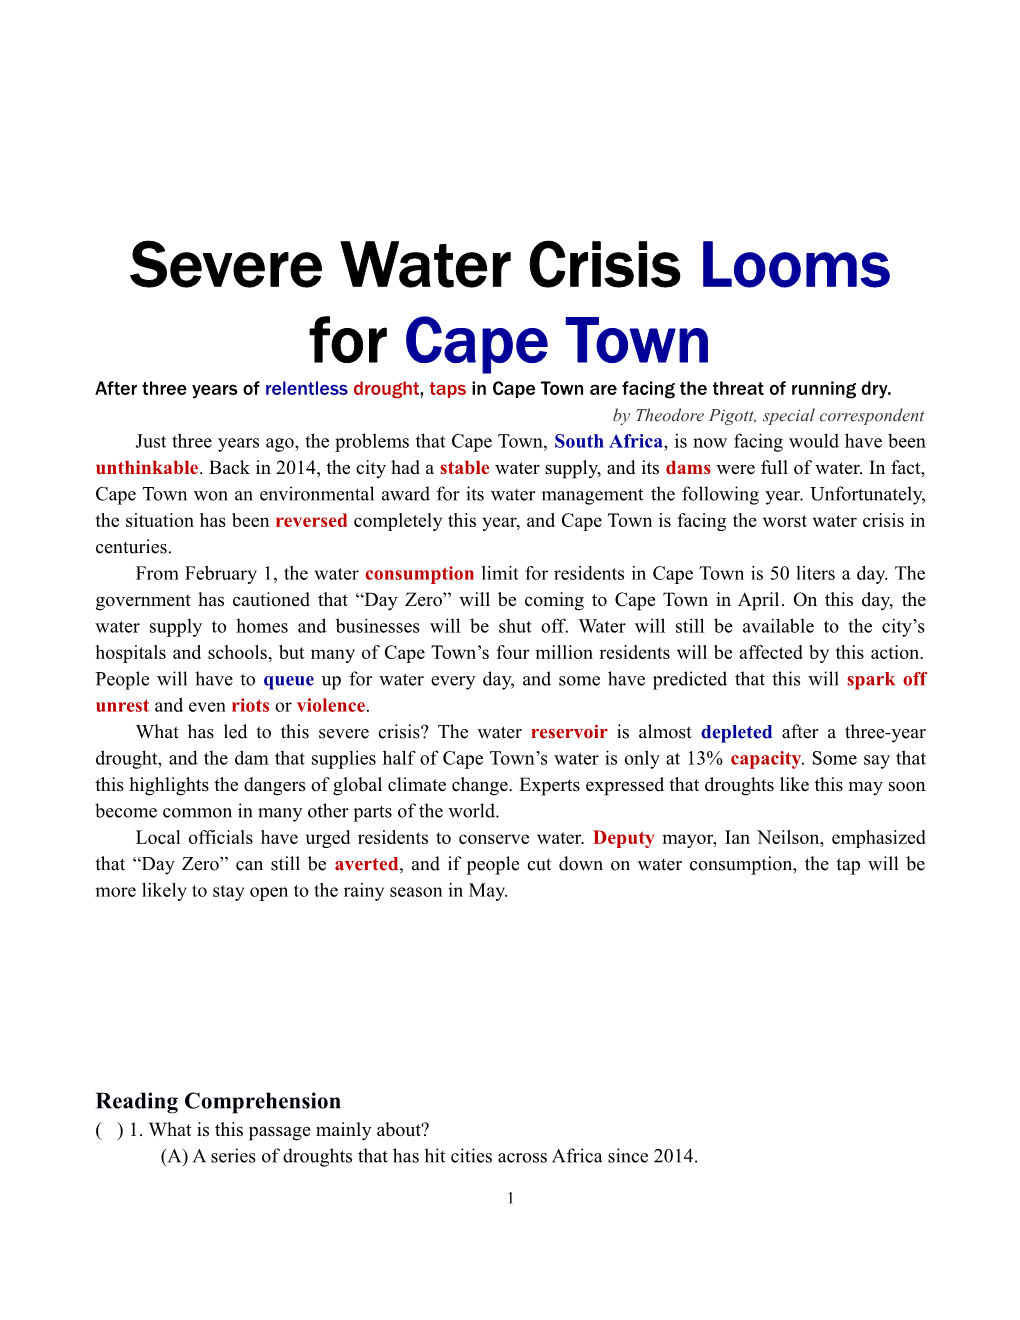 Severe Water Crisis Looms for Cape Town